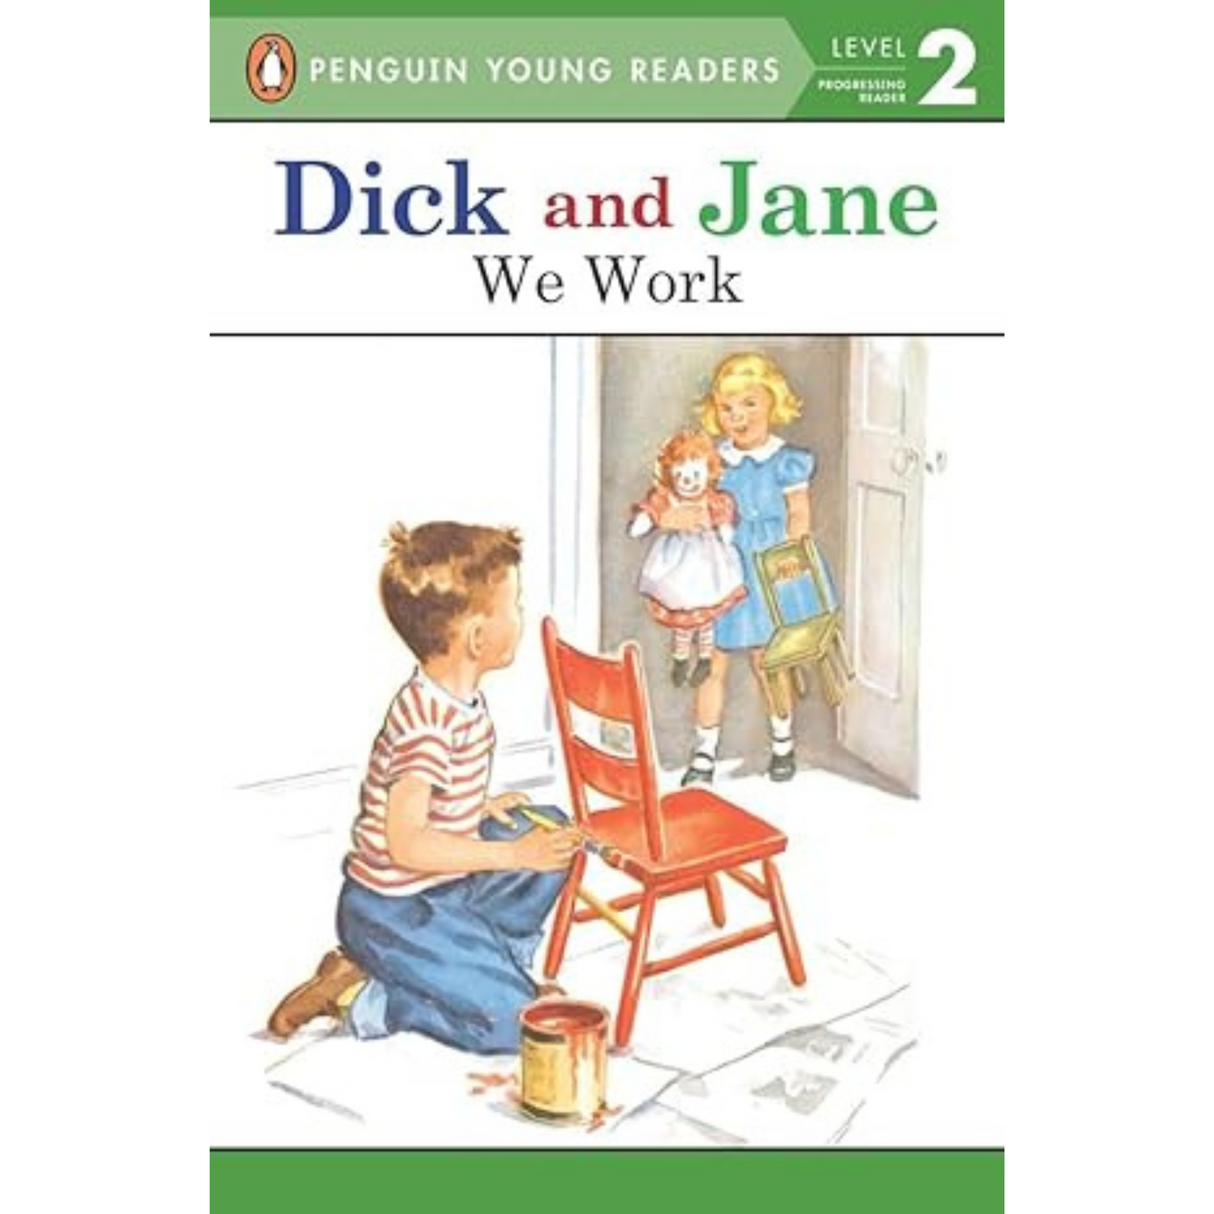 We Work (Dick and Jane) Paperback – January 19, 2004